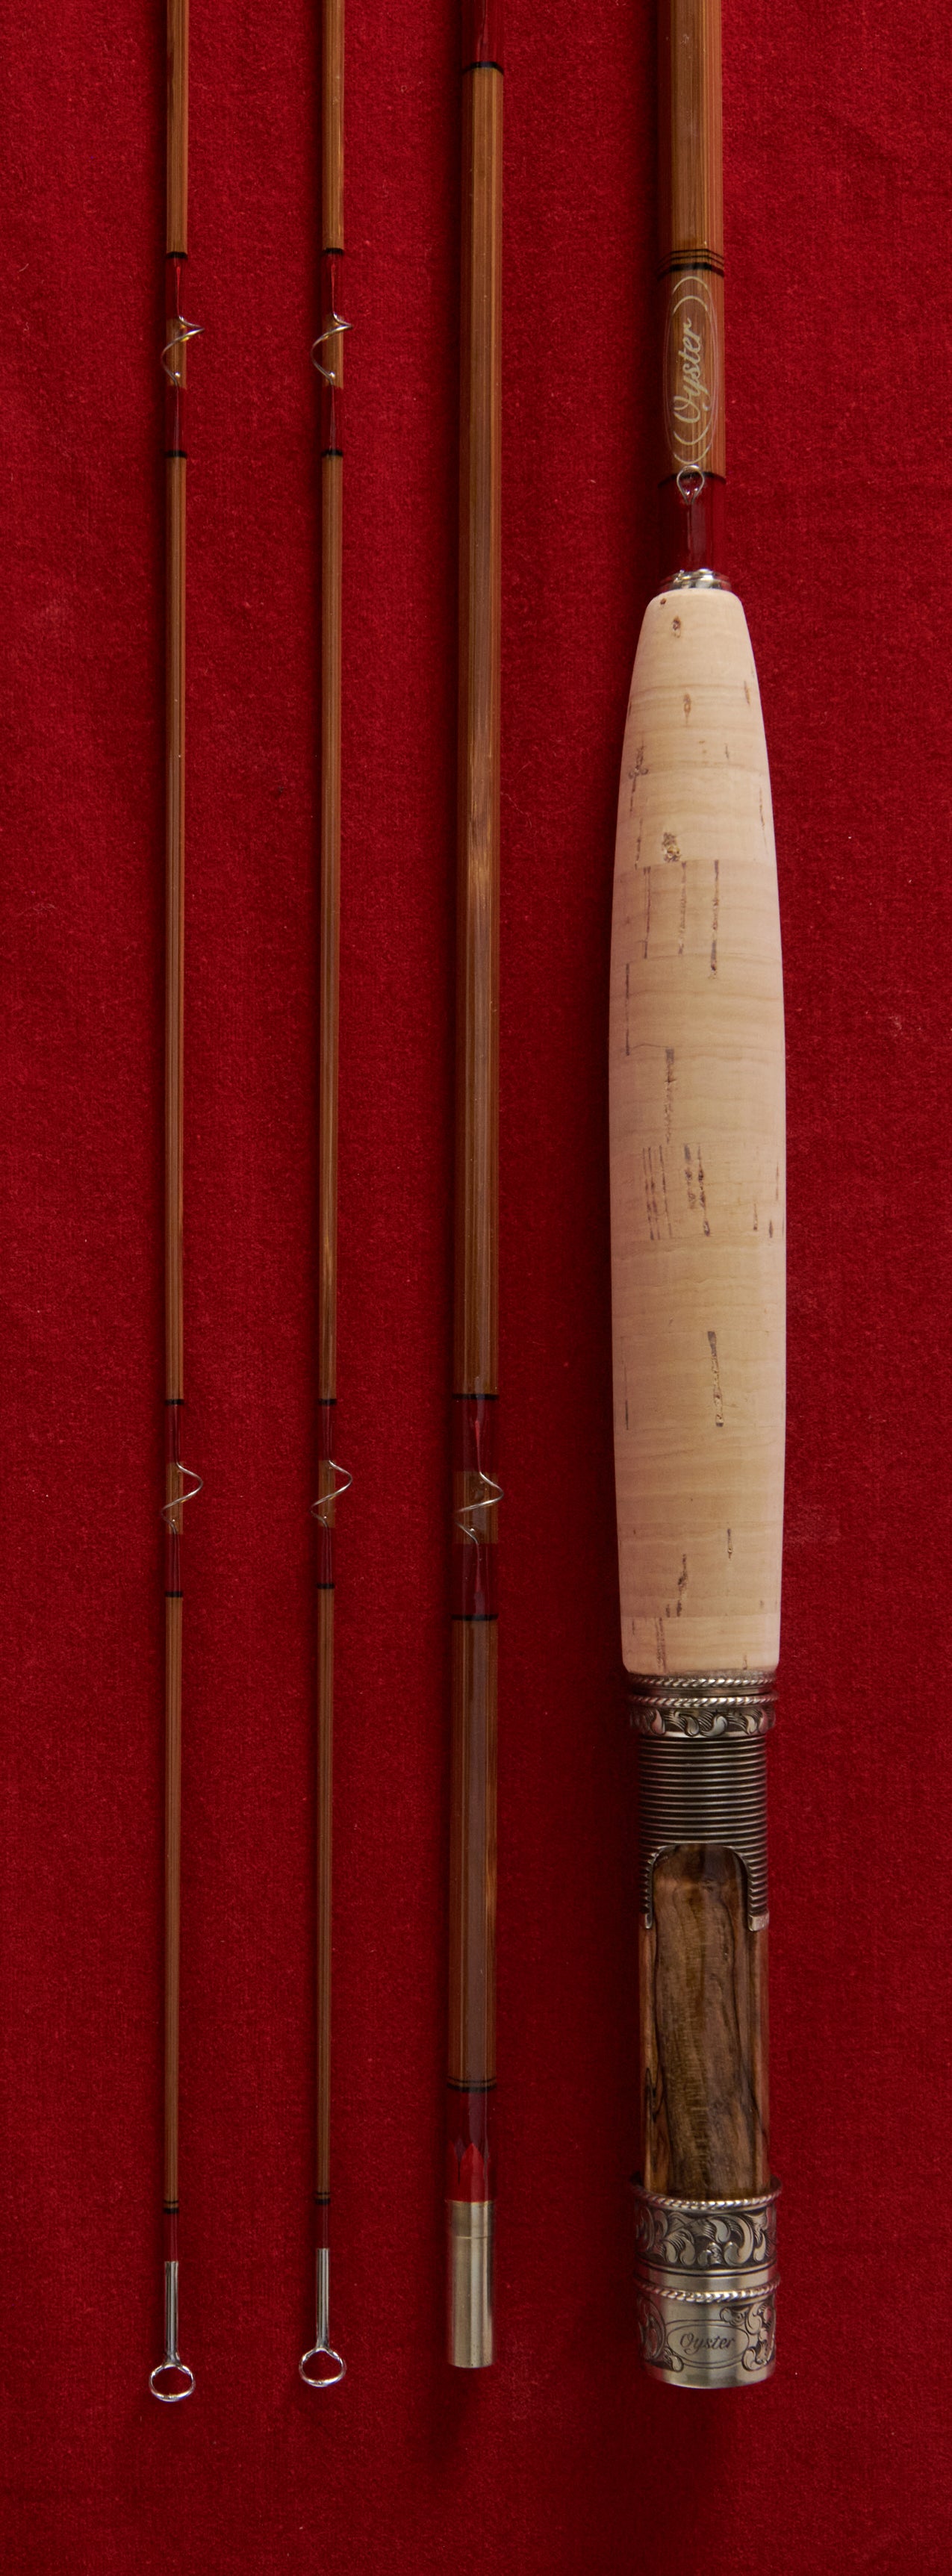 Oyster 7'9 5wt Bamboo Fly Rod Master Series For Sale